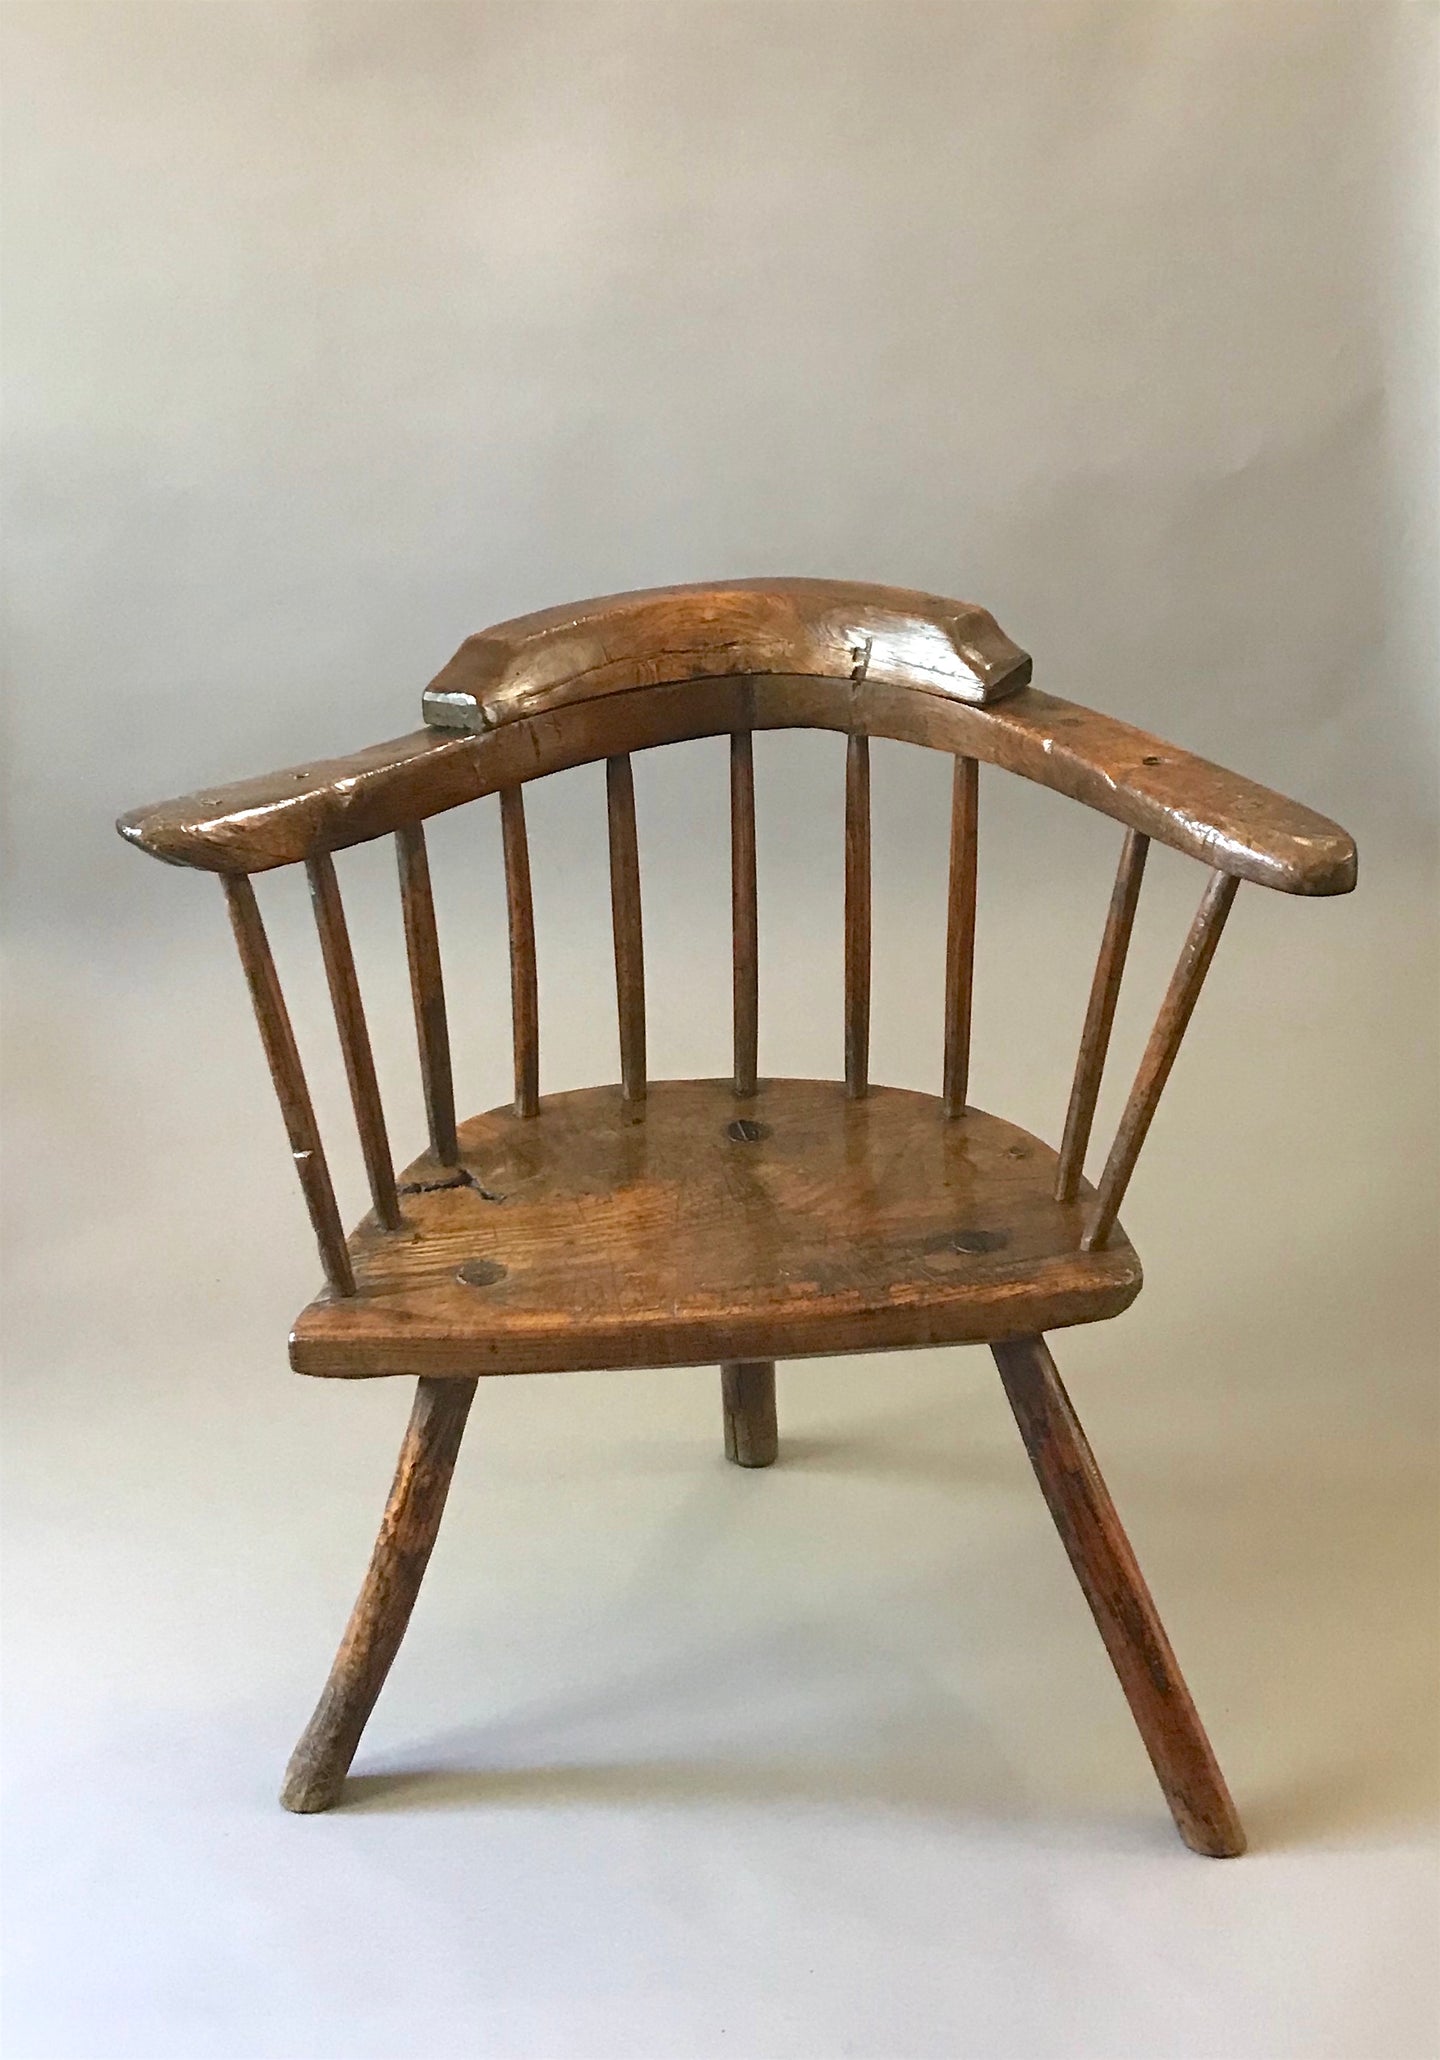 Small 18th century Cardiganshire stick chair